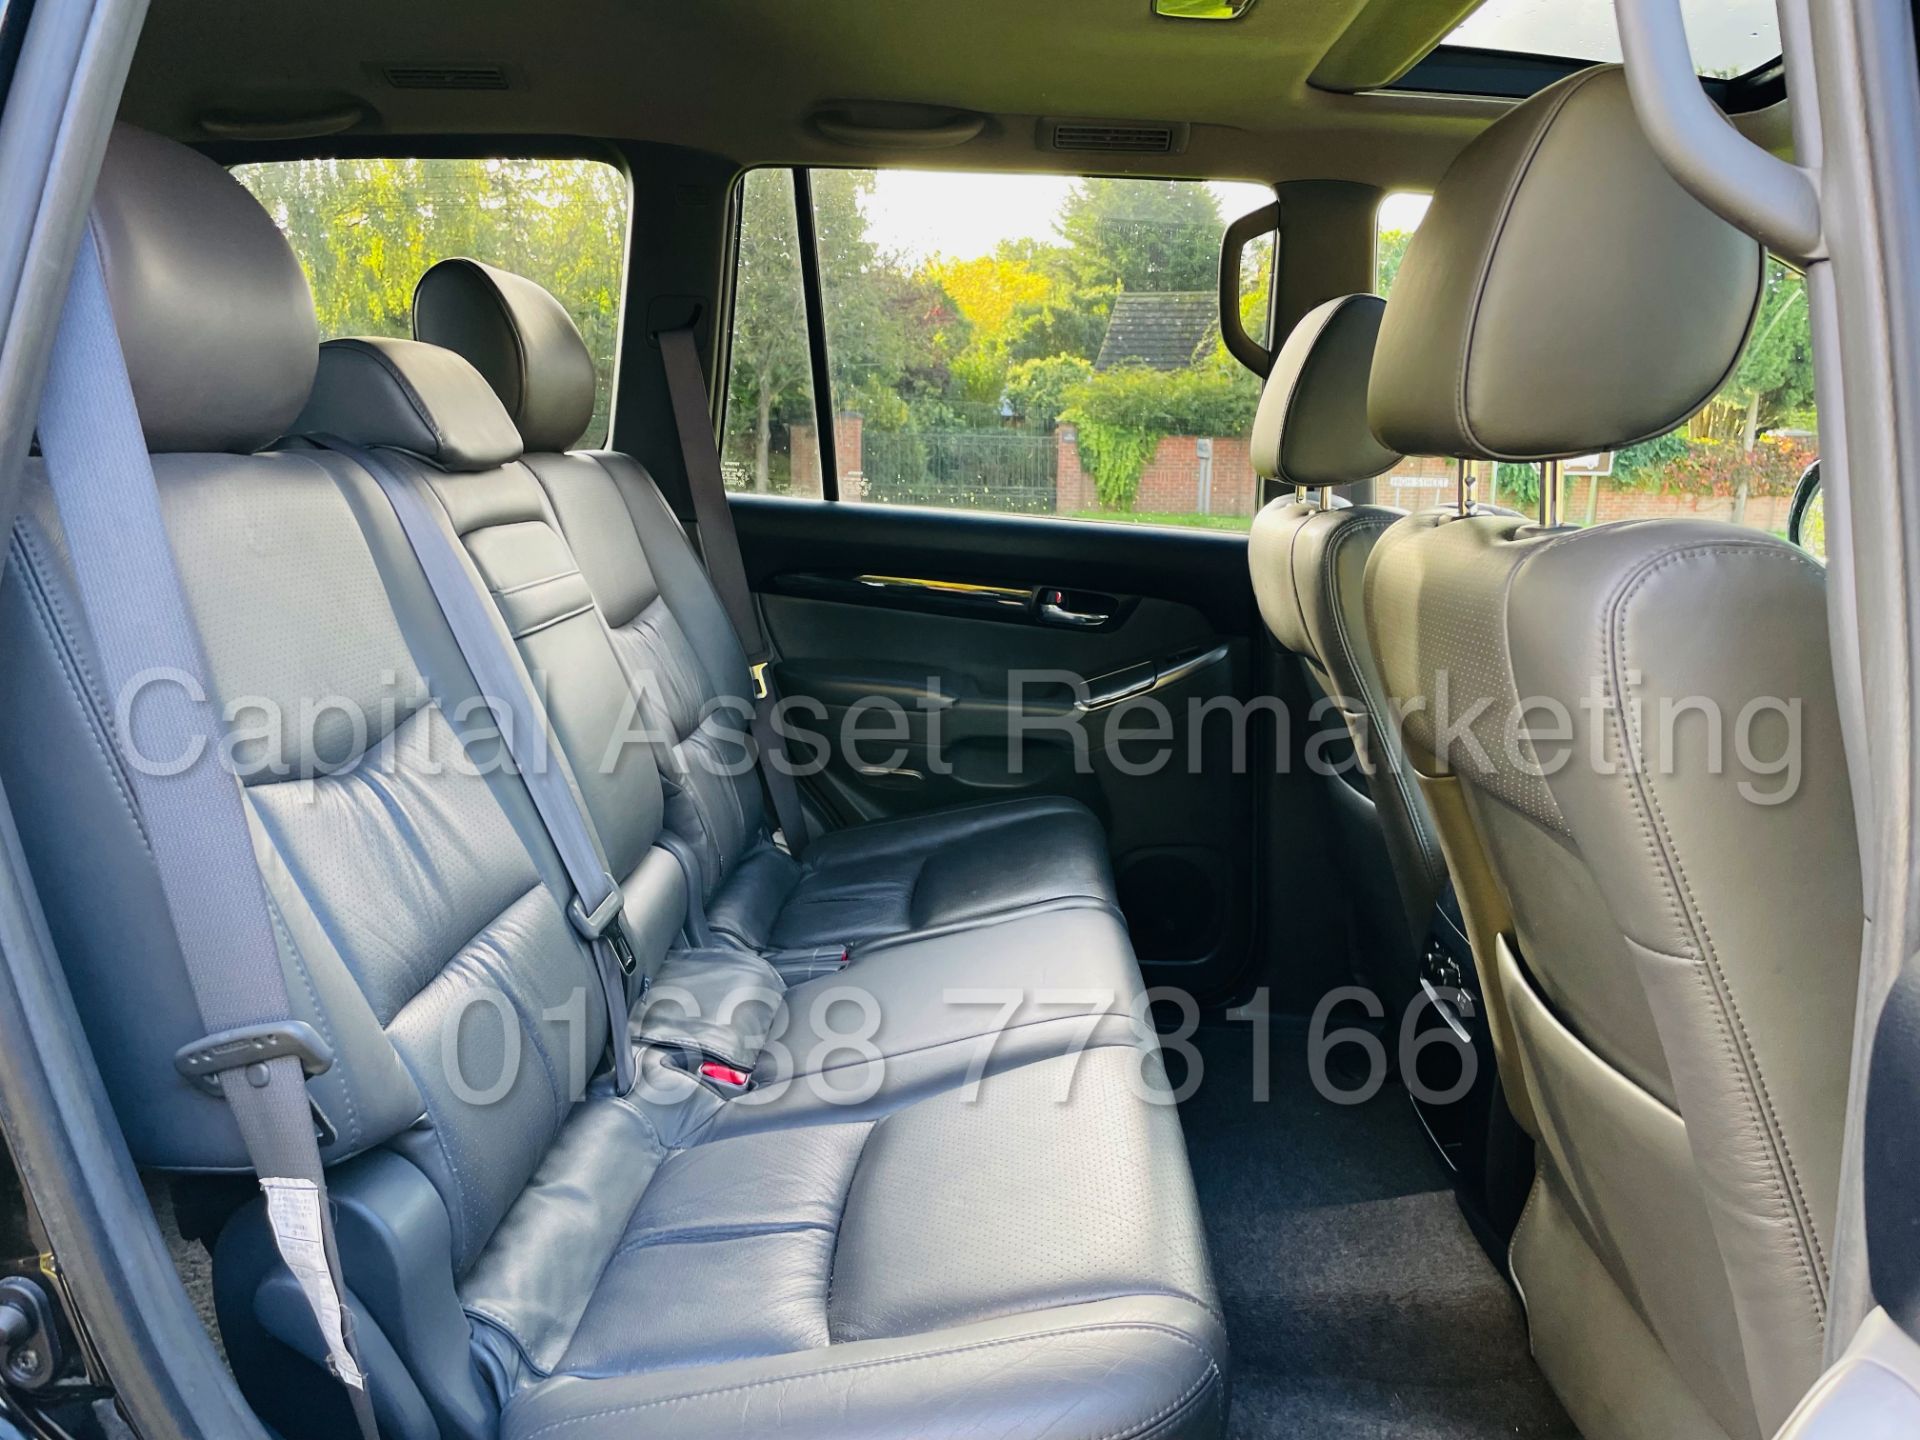 TOYOTA LAND CRUISER *INVINCIBLE* 7 SEATER SUV (2008) '3.0 D-4D - AUTO' *LEATHER & NAV* (1 OWNER) - Image 39 of 62